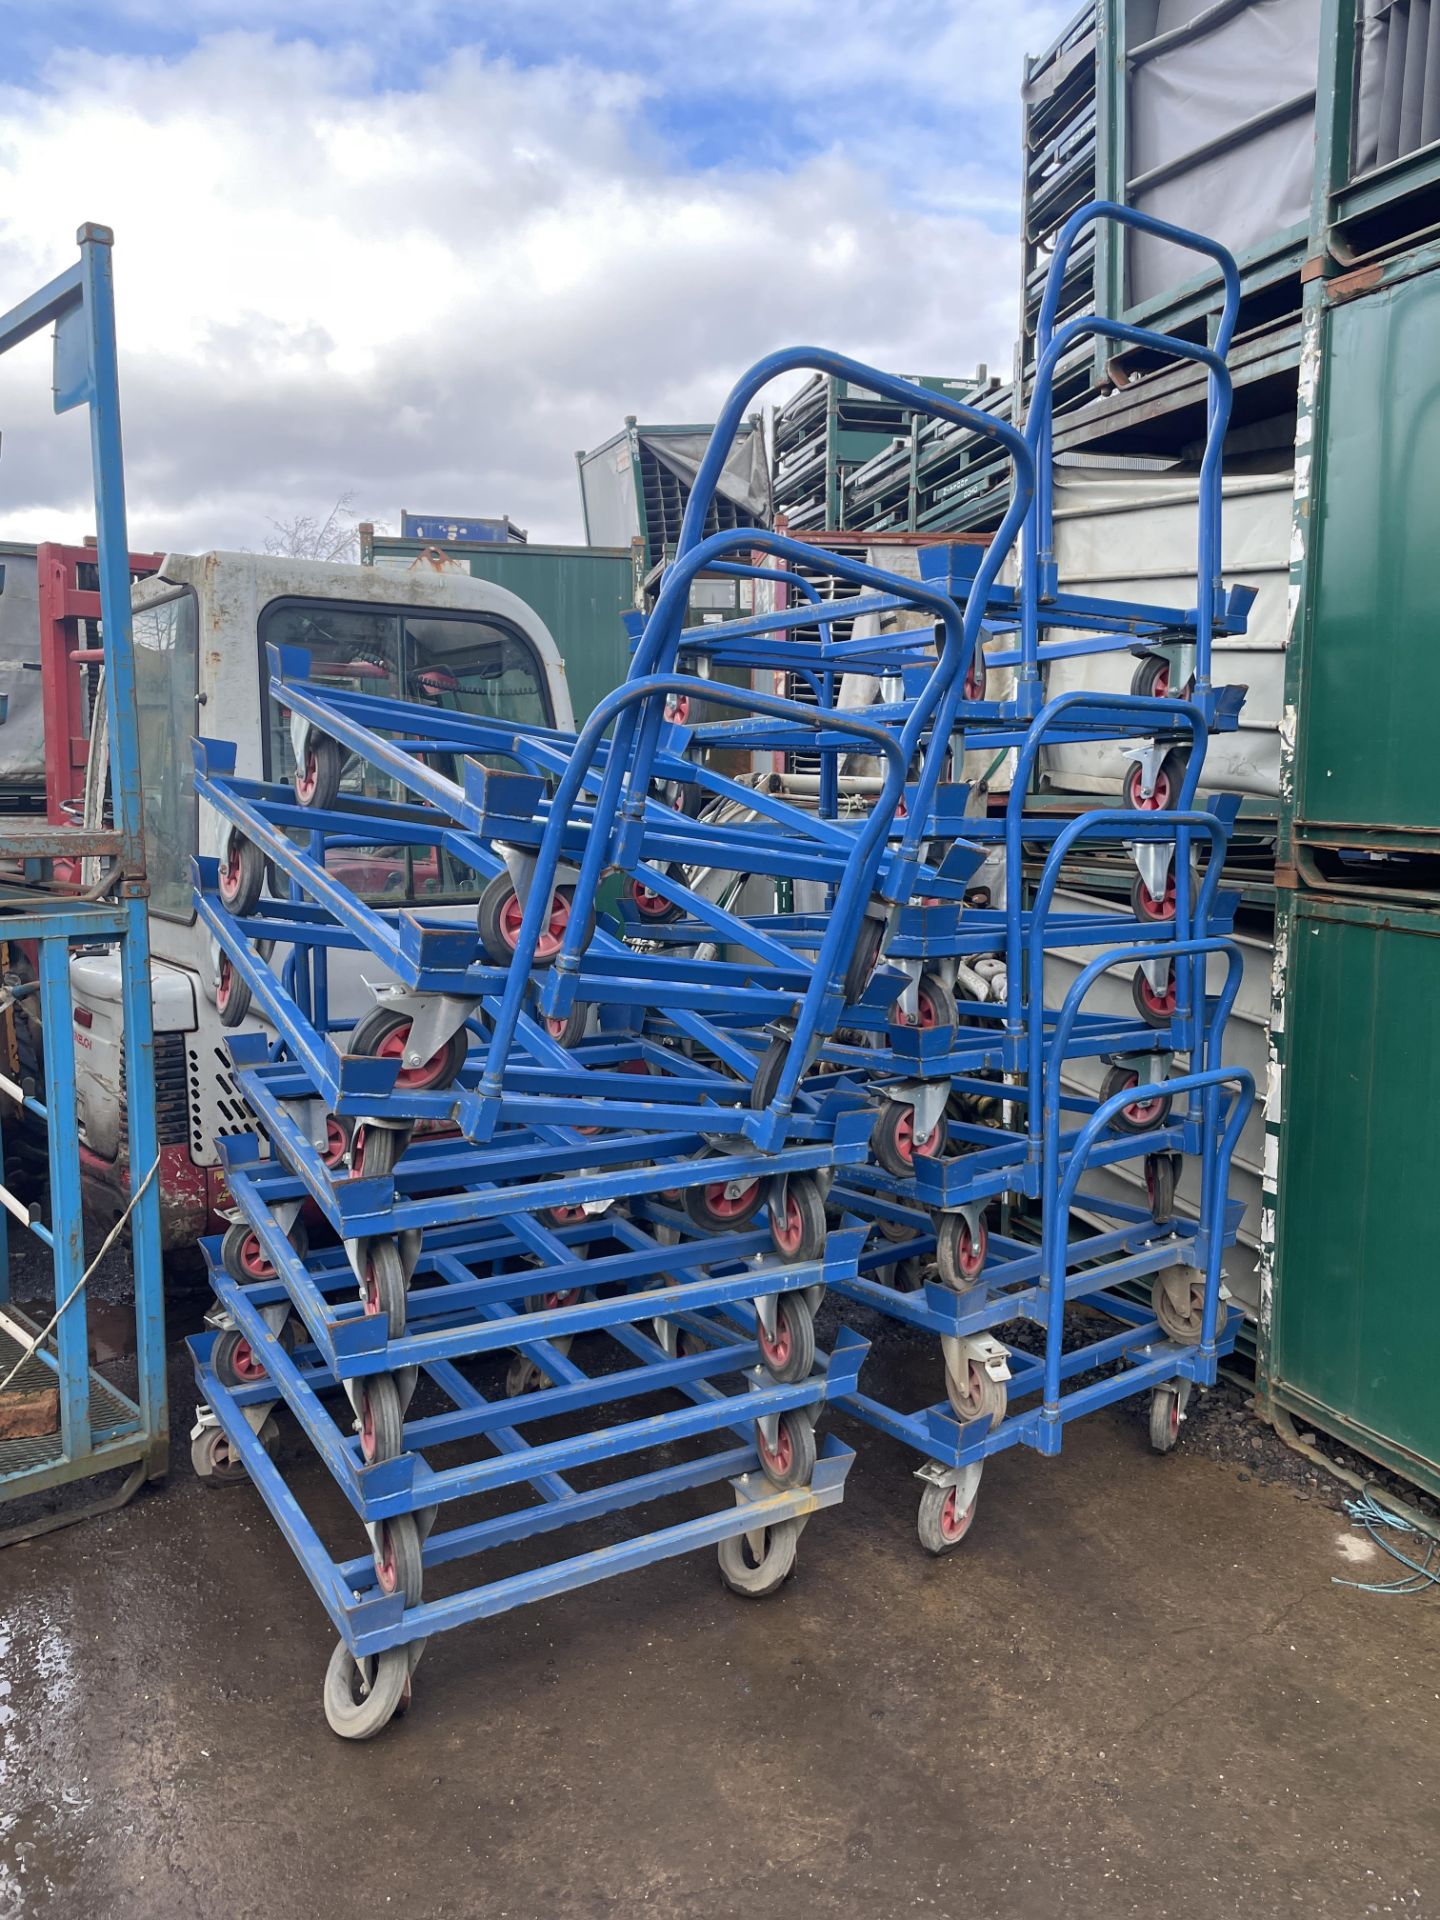 Five Steel Framed Trolleys, each approx. 1.25m x 1m (Contractors take out charge - £10) Please